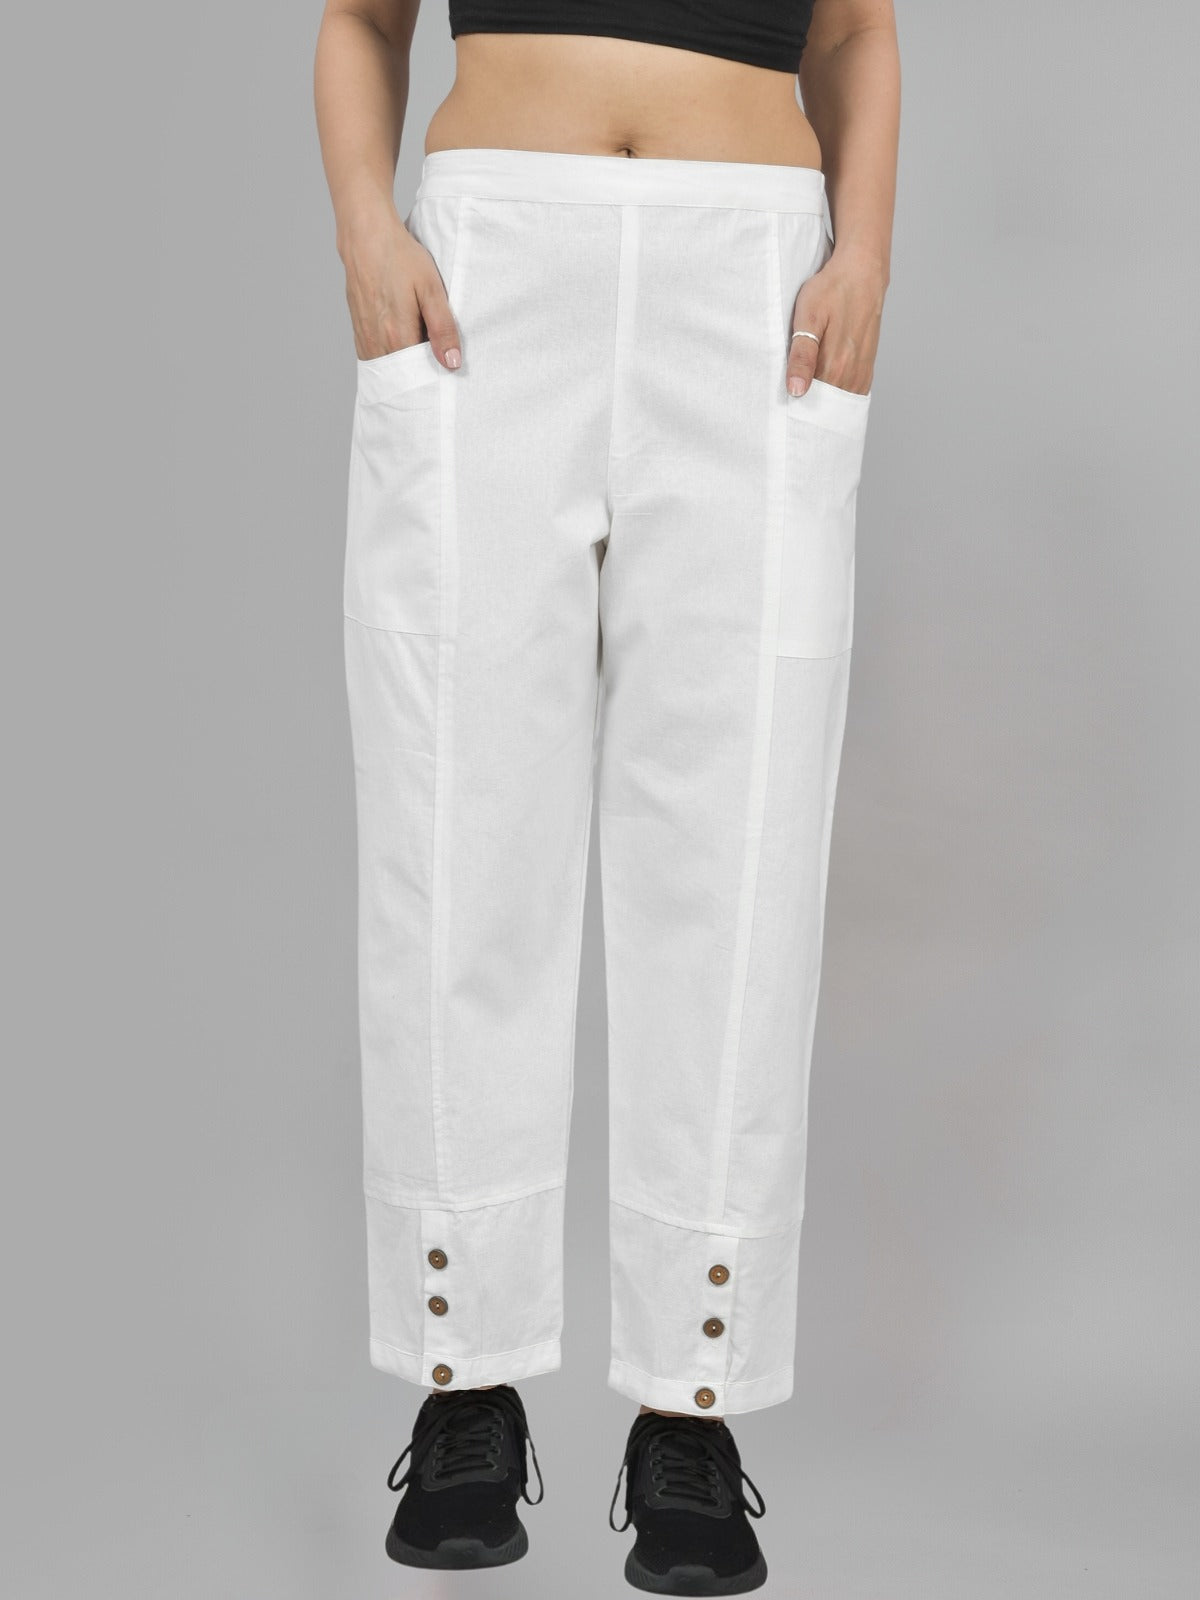 Combo Pack Of Womens White And Black Side Pocket Straight Cargo Pants